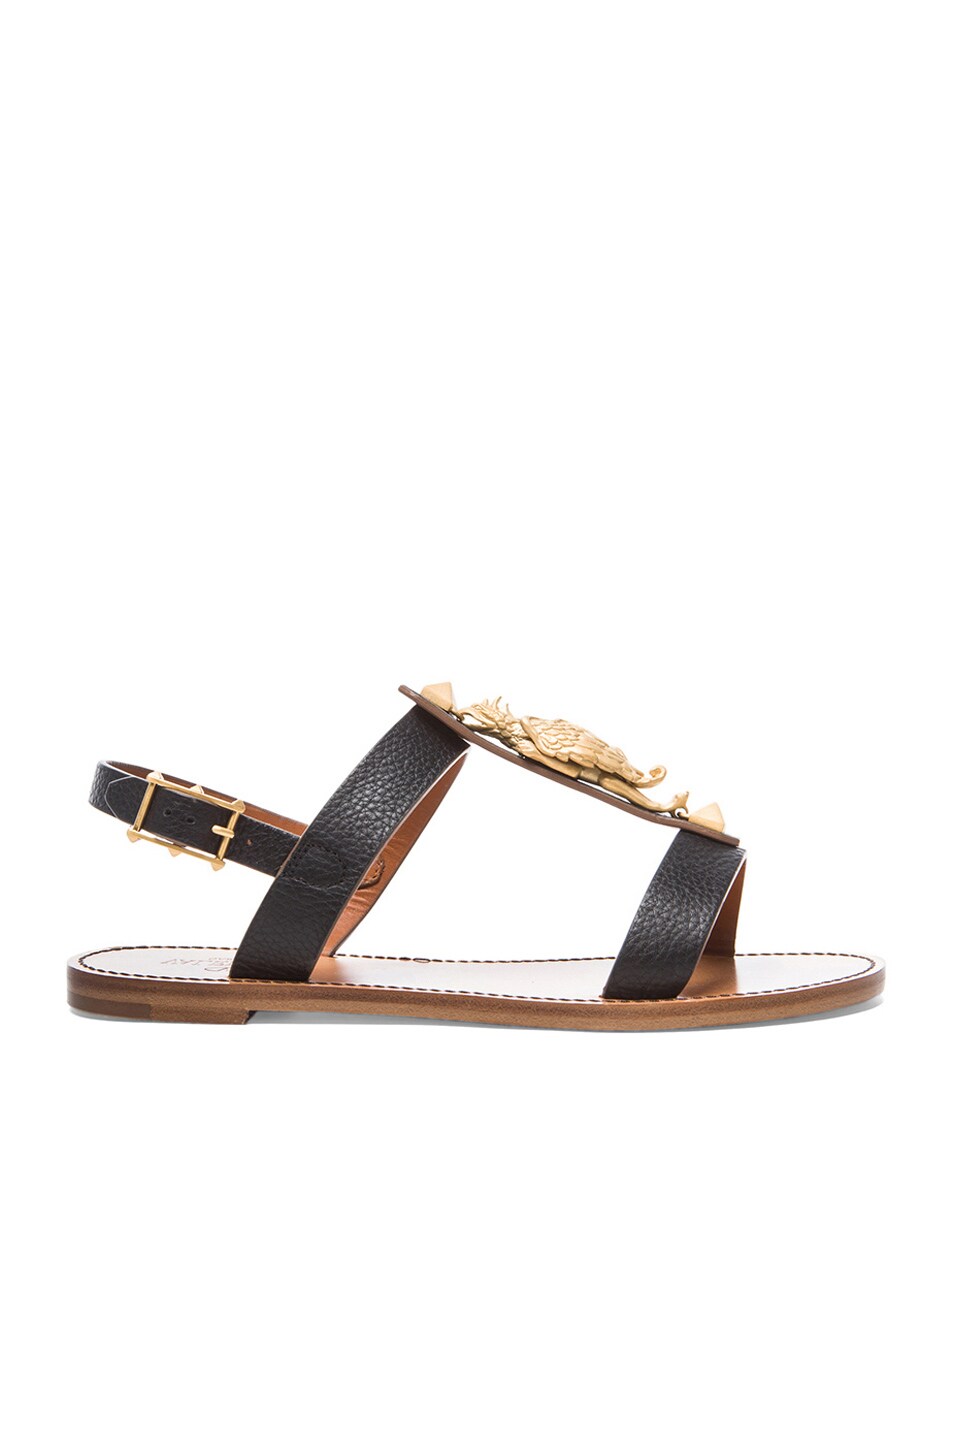 Valentino Ethno Elements Grained Leather Sandals in Black | FWRD